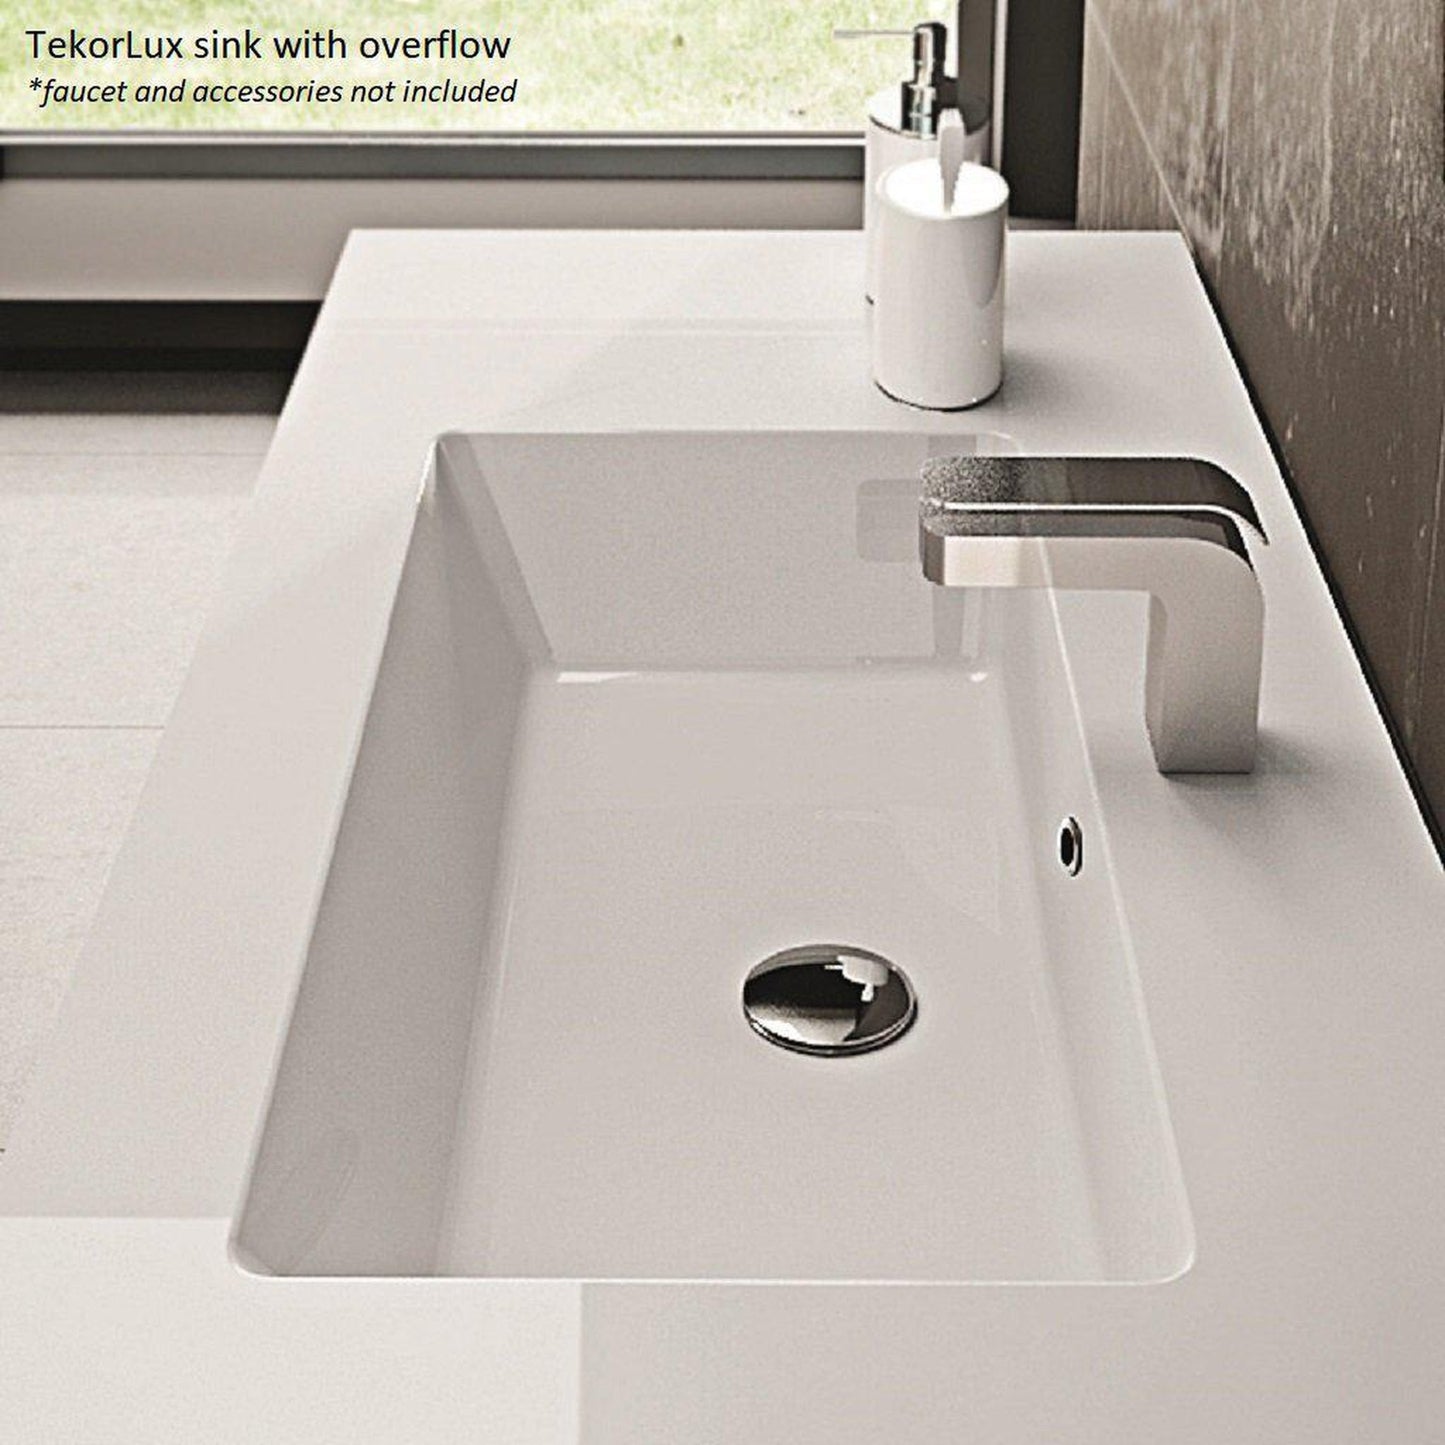 LaToscana Ameno 52" Sand Wall-Mounted Vanity Set With Right Rounded & Left Concave Cabinets